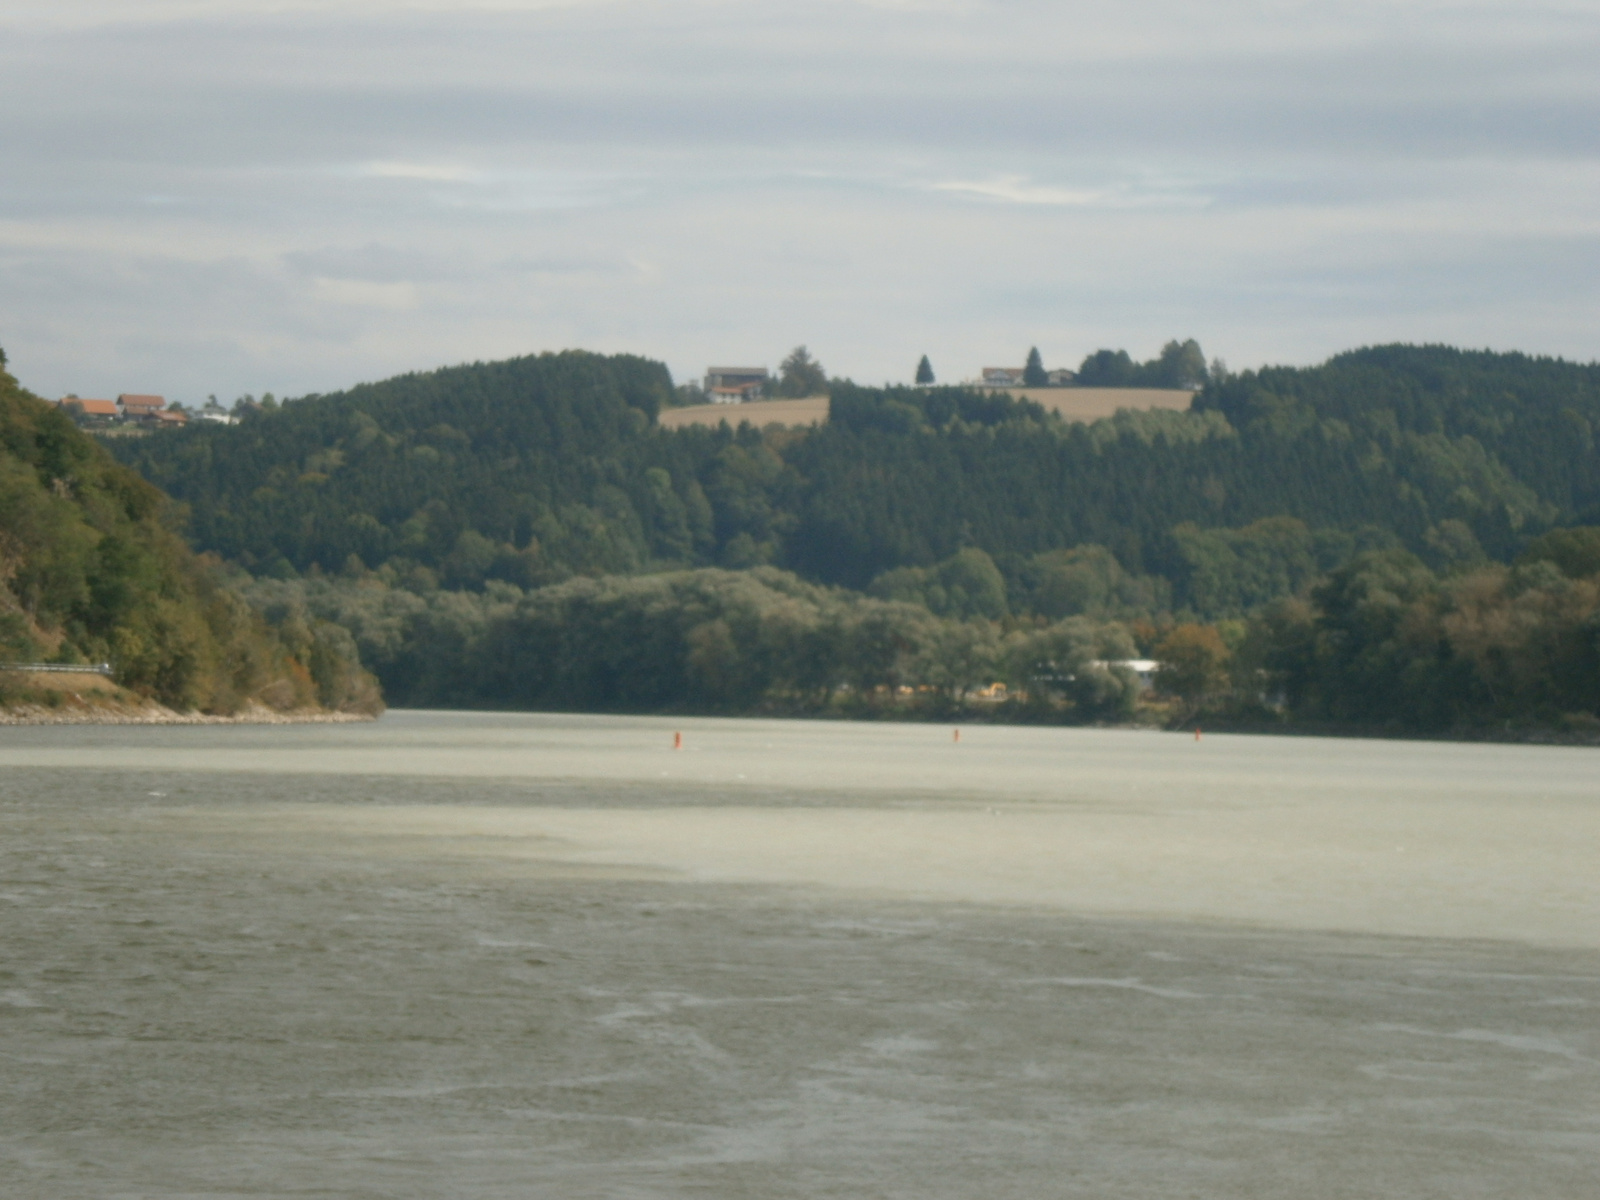 117 Day 9 Germany, Passau, the river Danube (l) and Inn (r) meet